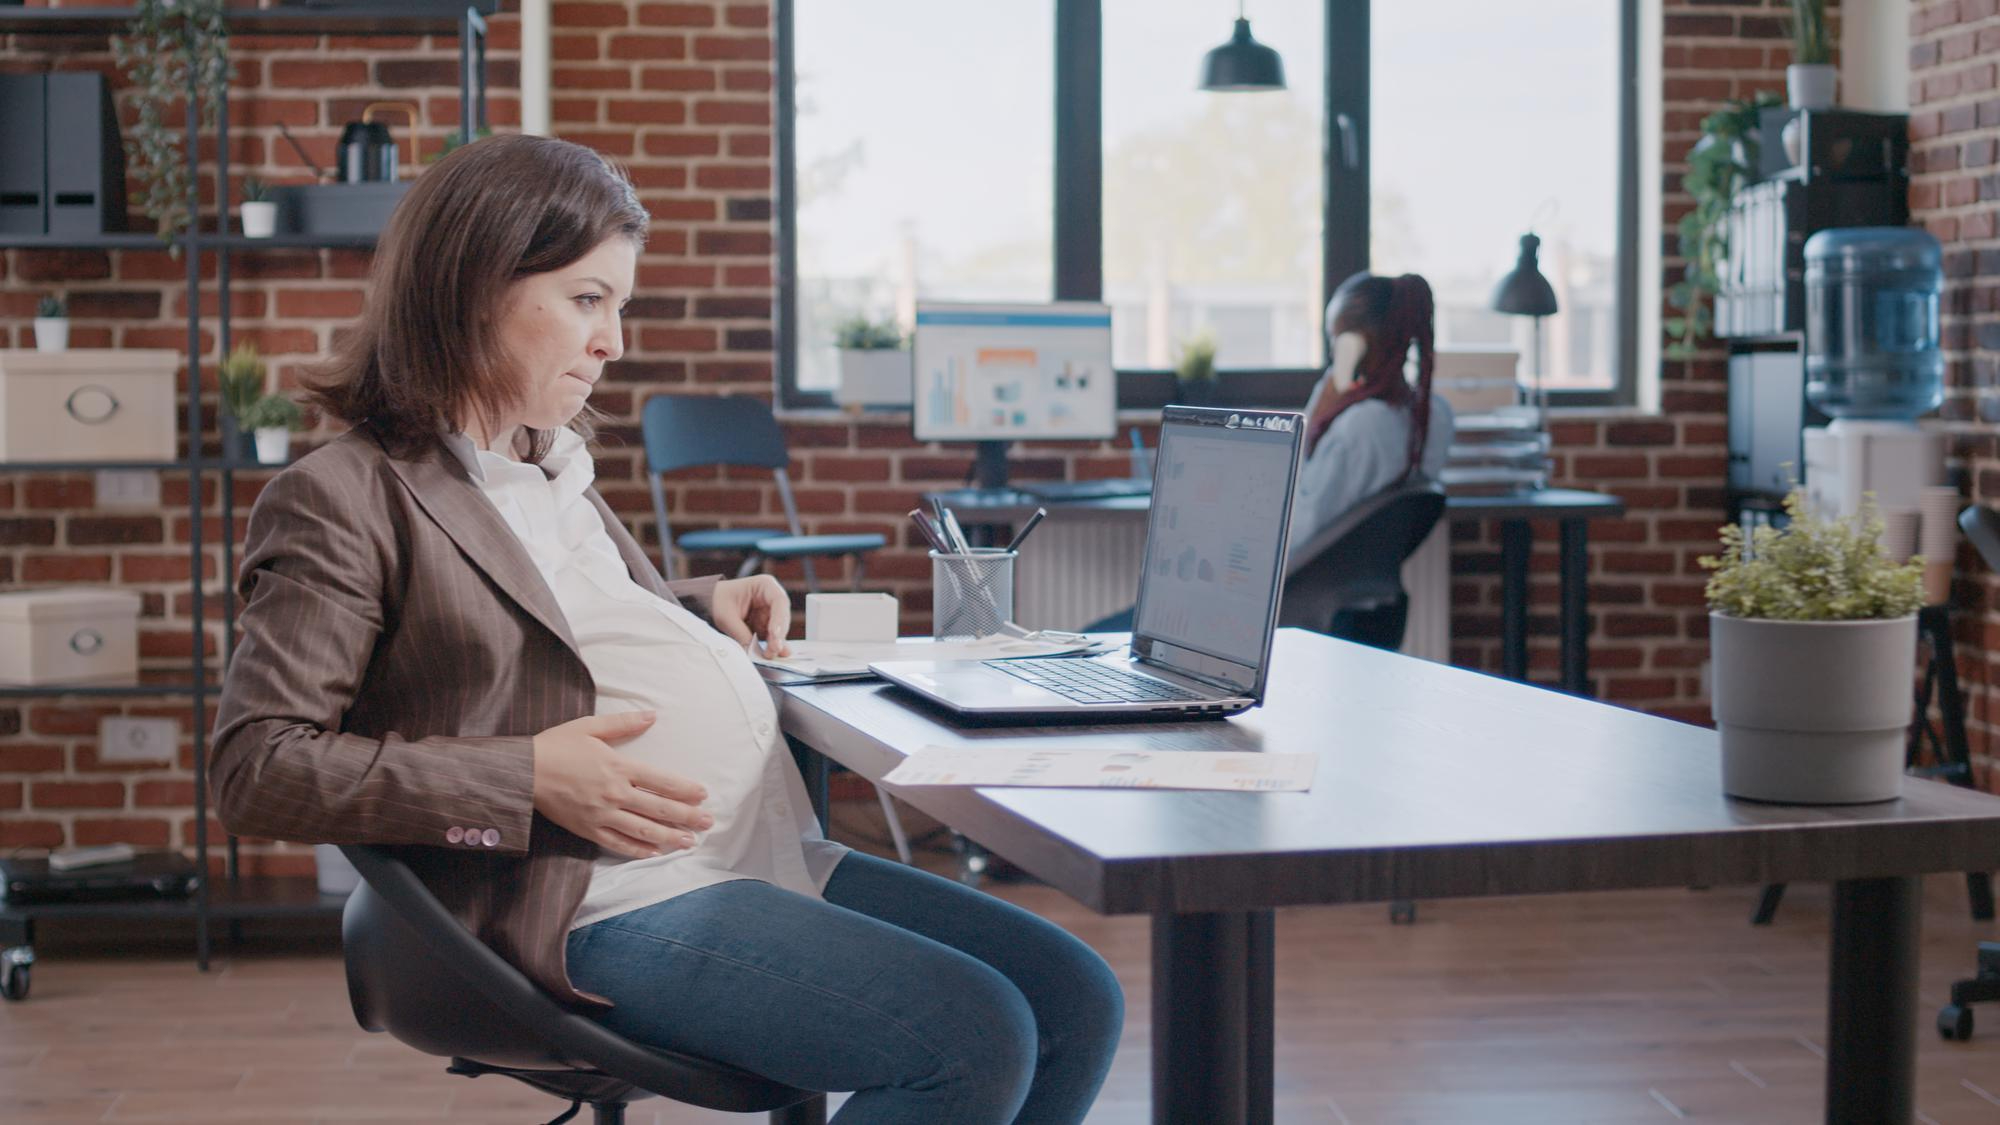 pregnant-business-woman-working-laptop-using-documents-marketing-strategy-startup-office-employee-expecting-child-working-project-planning-with-computer-files